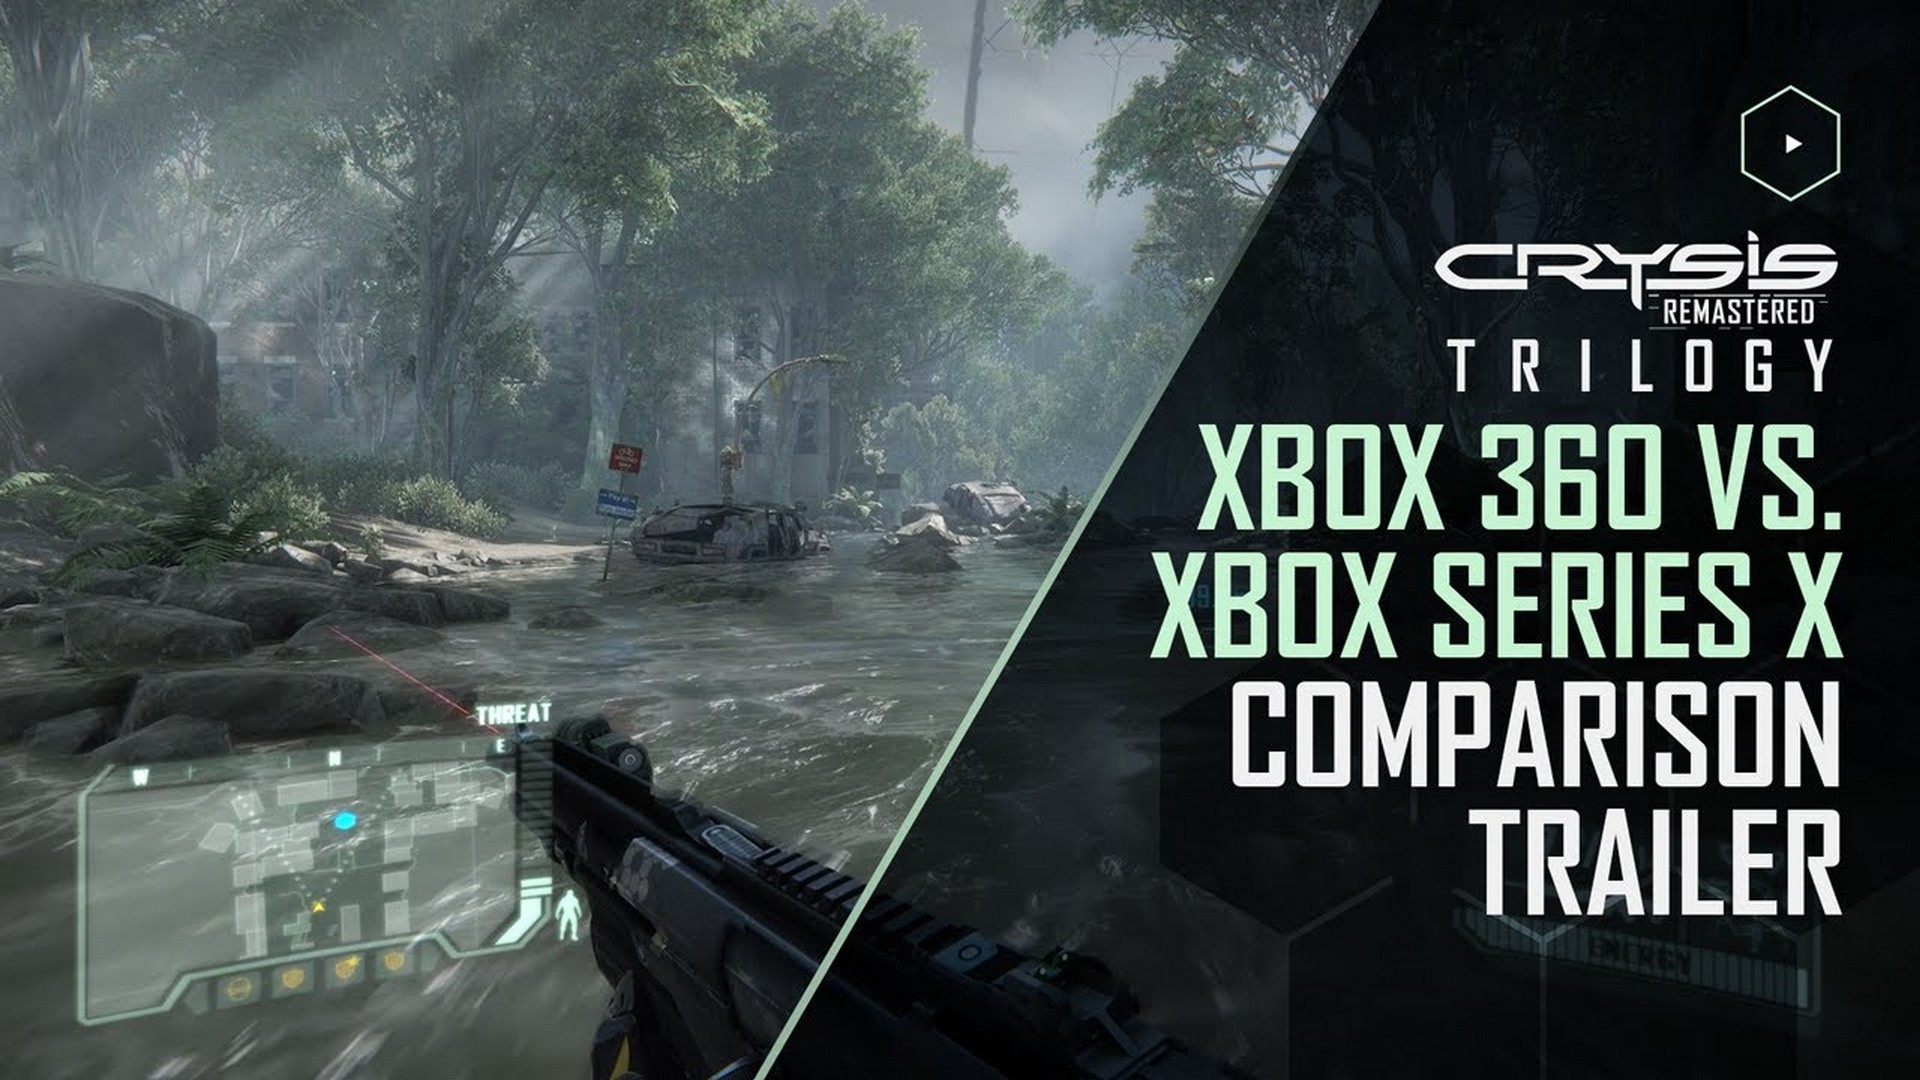 Crysis Remastered Trilogy Showcases Xbox Improvements, Switch Releases 28th September